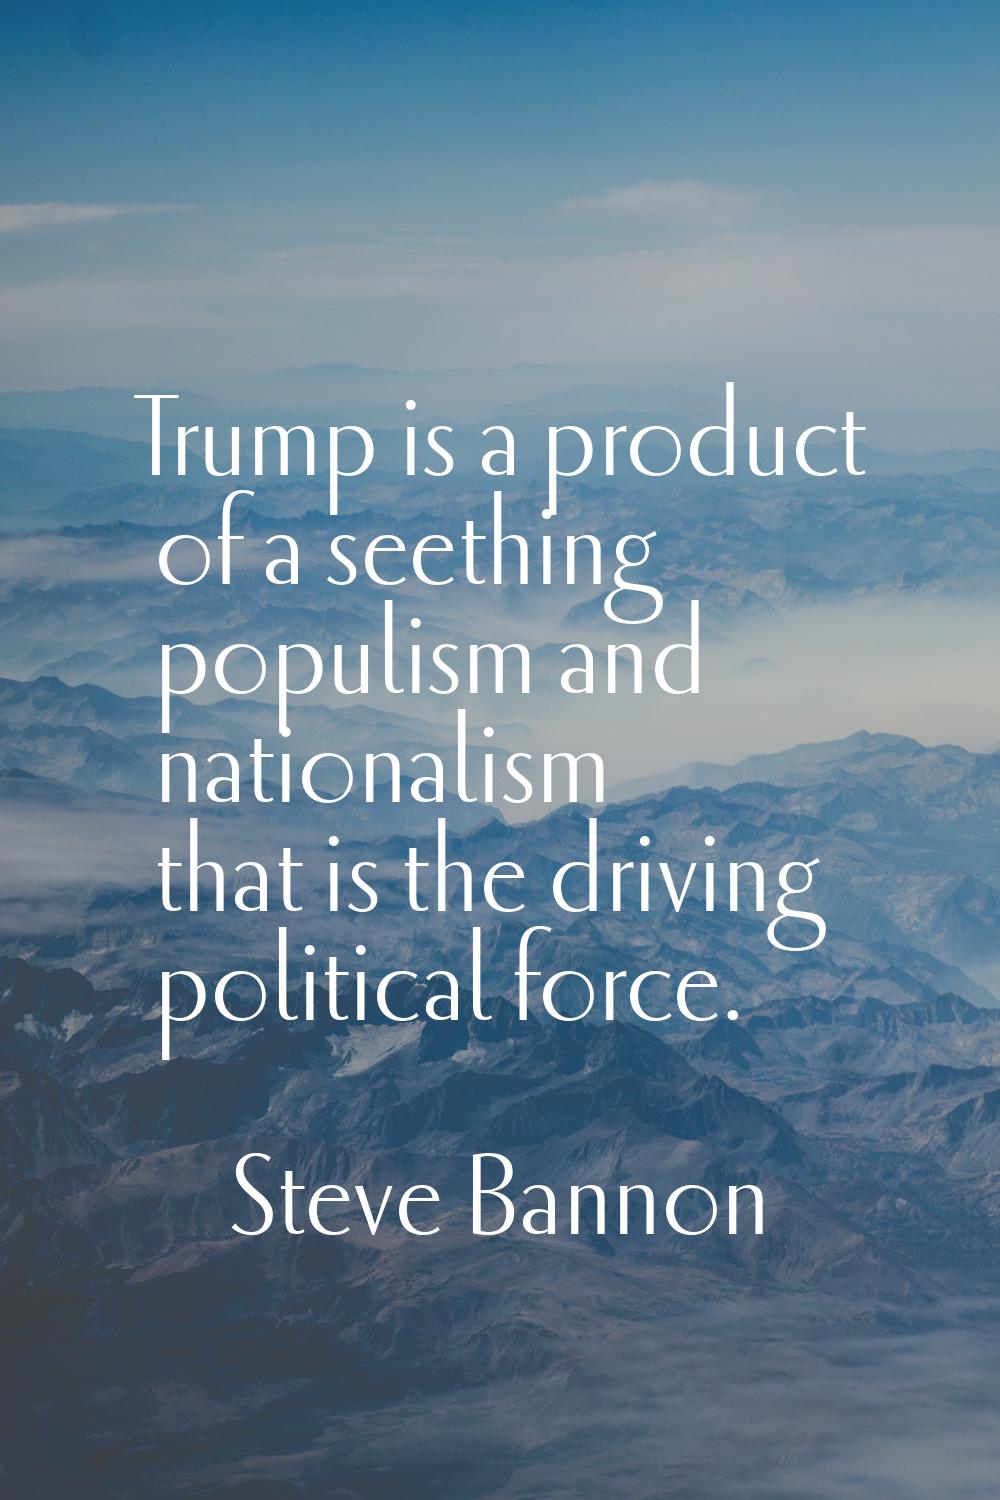 Trump is a product of a seething populism and nationalism that is the driving political force.